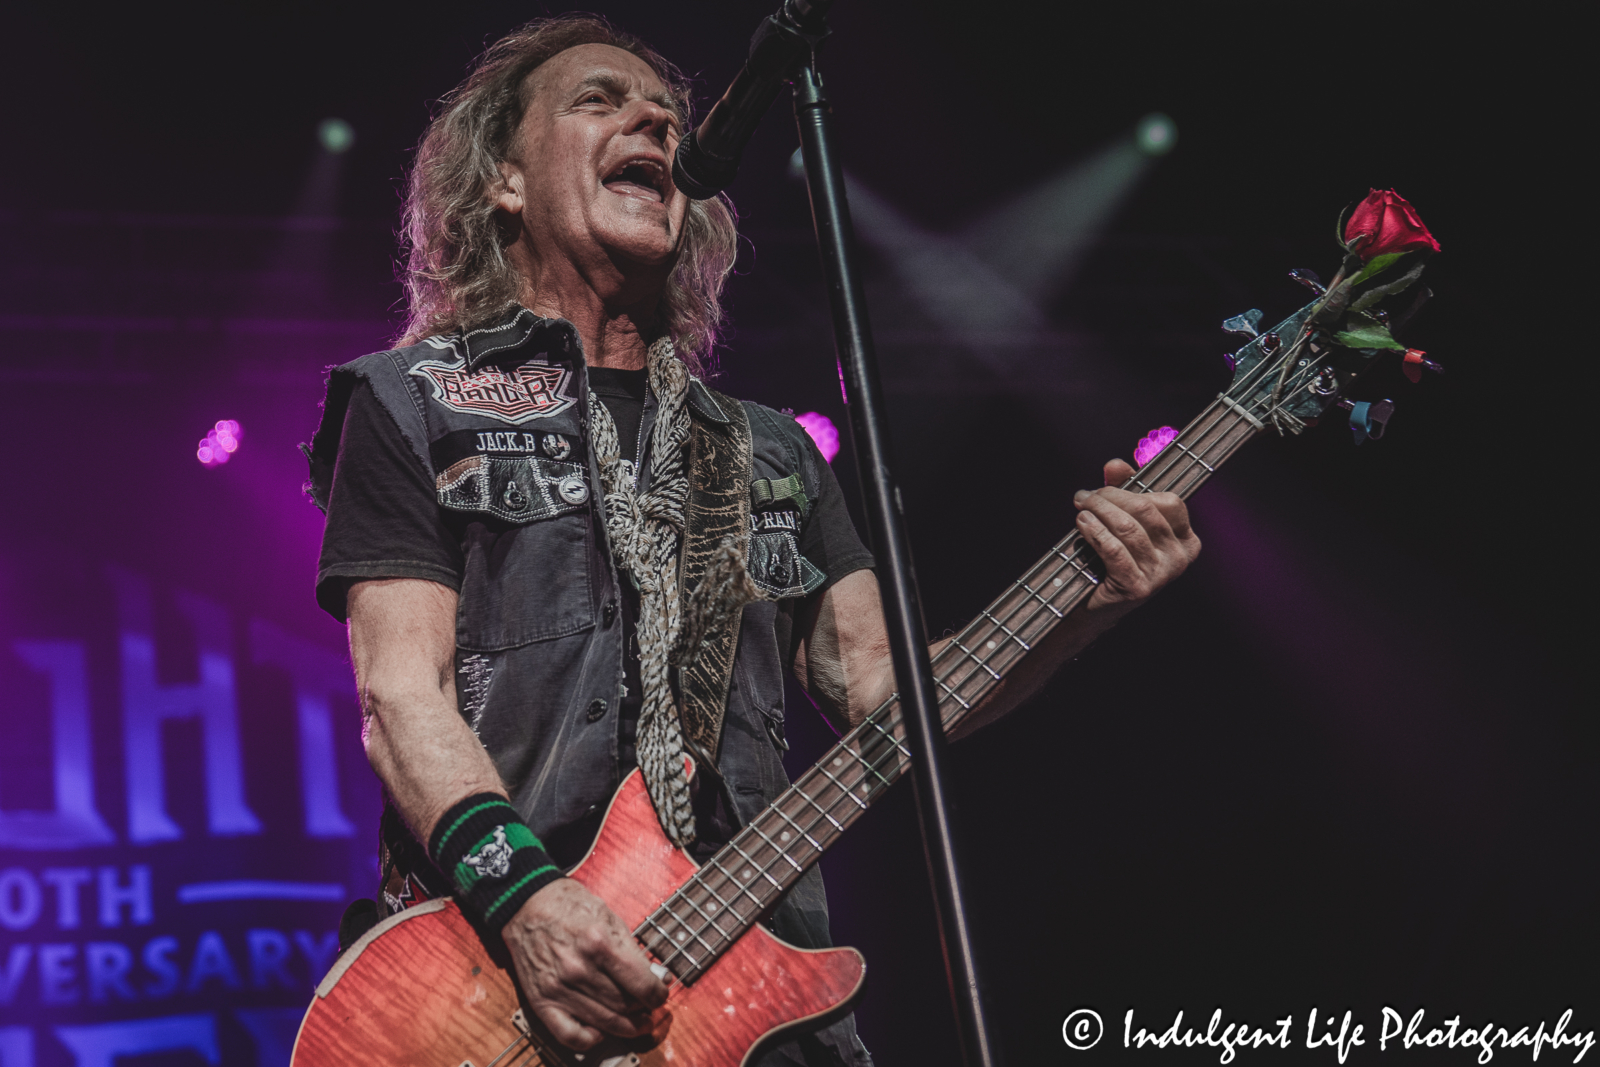 Night Ranger frontman and bassist Jack Blades performing live at Ameristar Casino's Star Pavilion in Kansas City, MO on October 20, 2023.